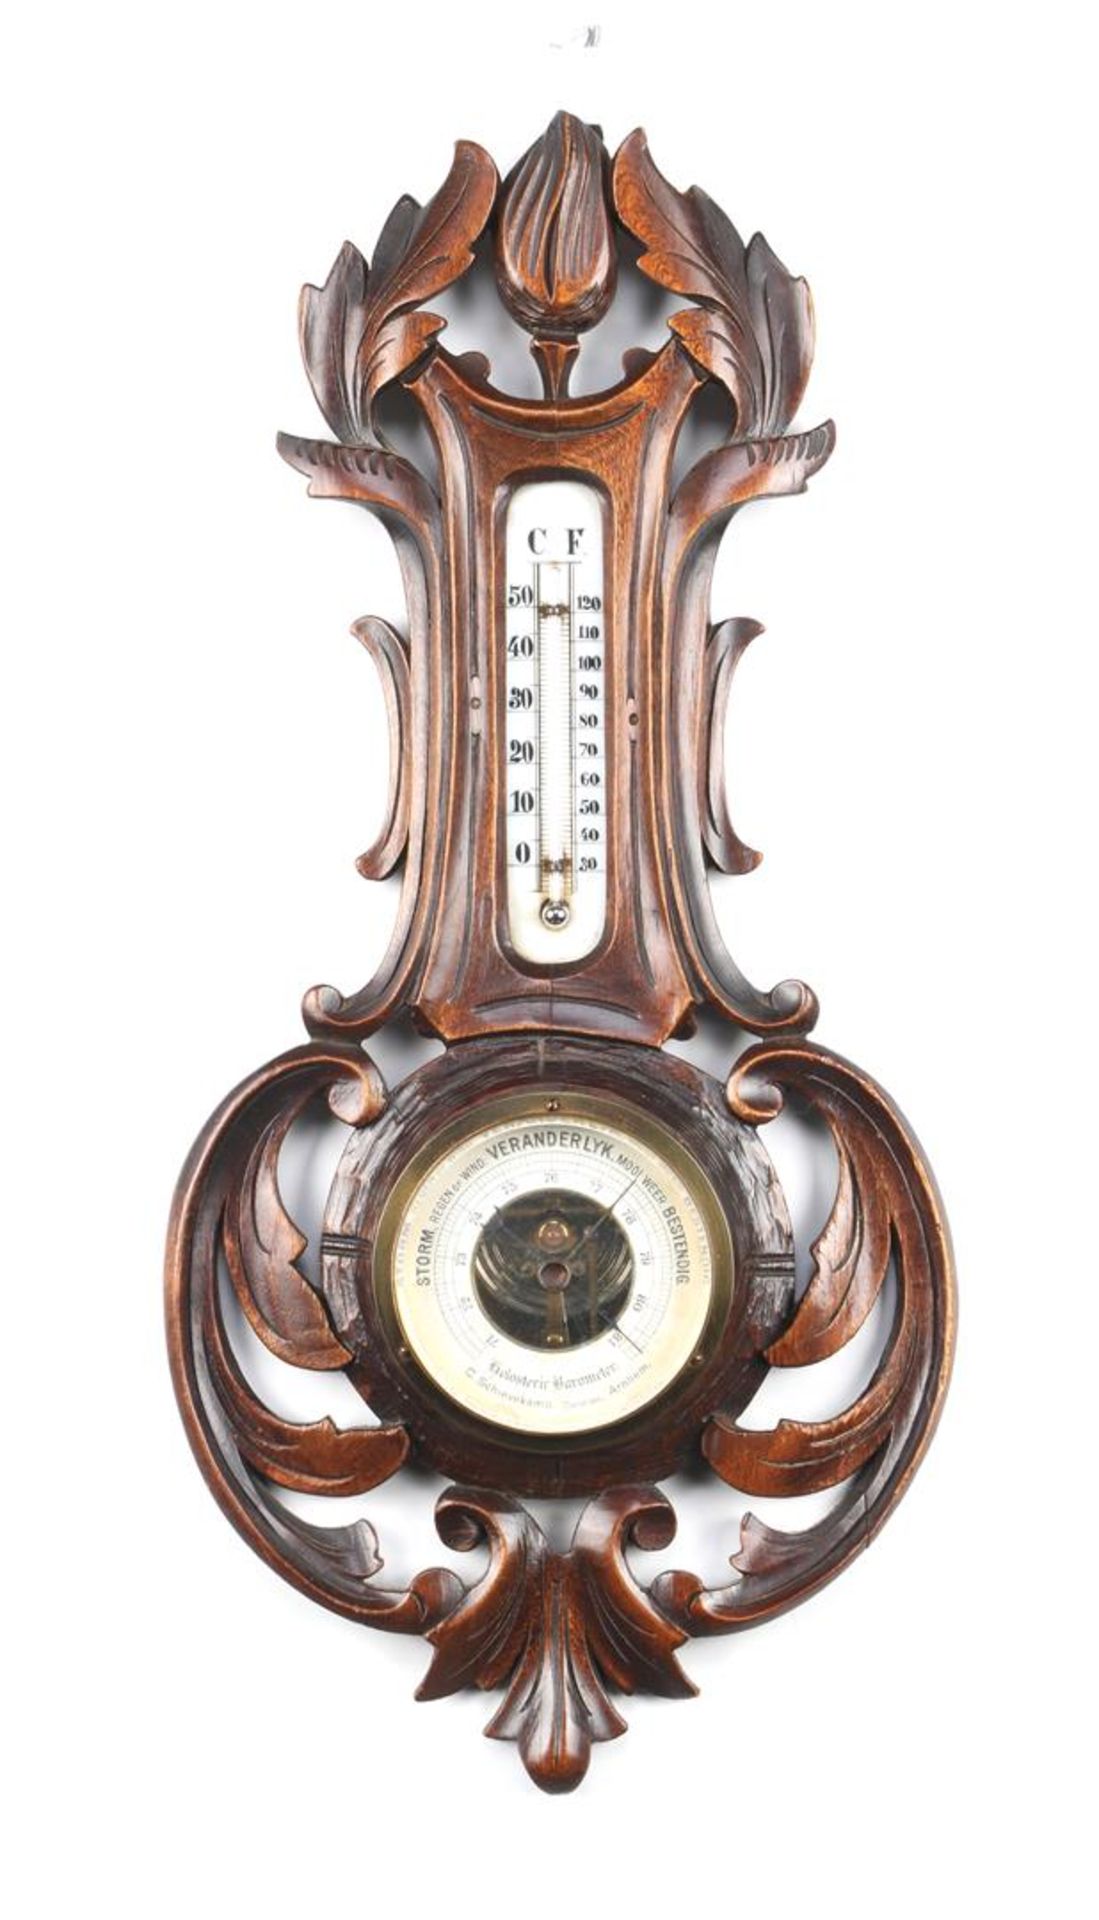 Dutch holosteric barometer